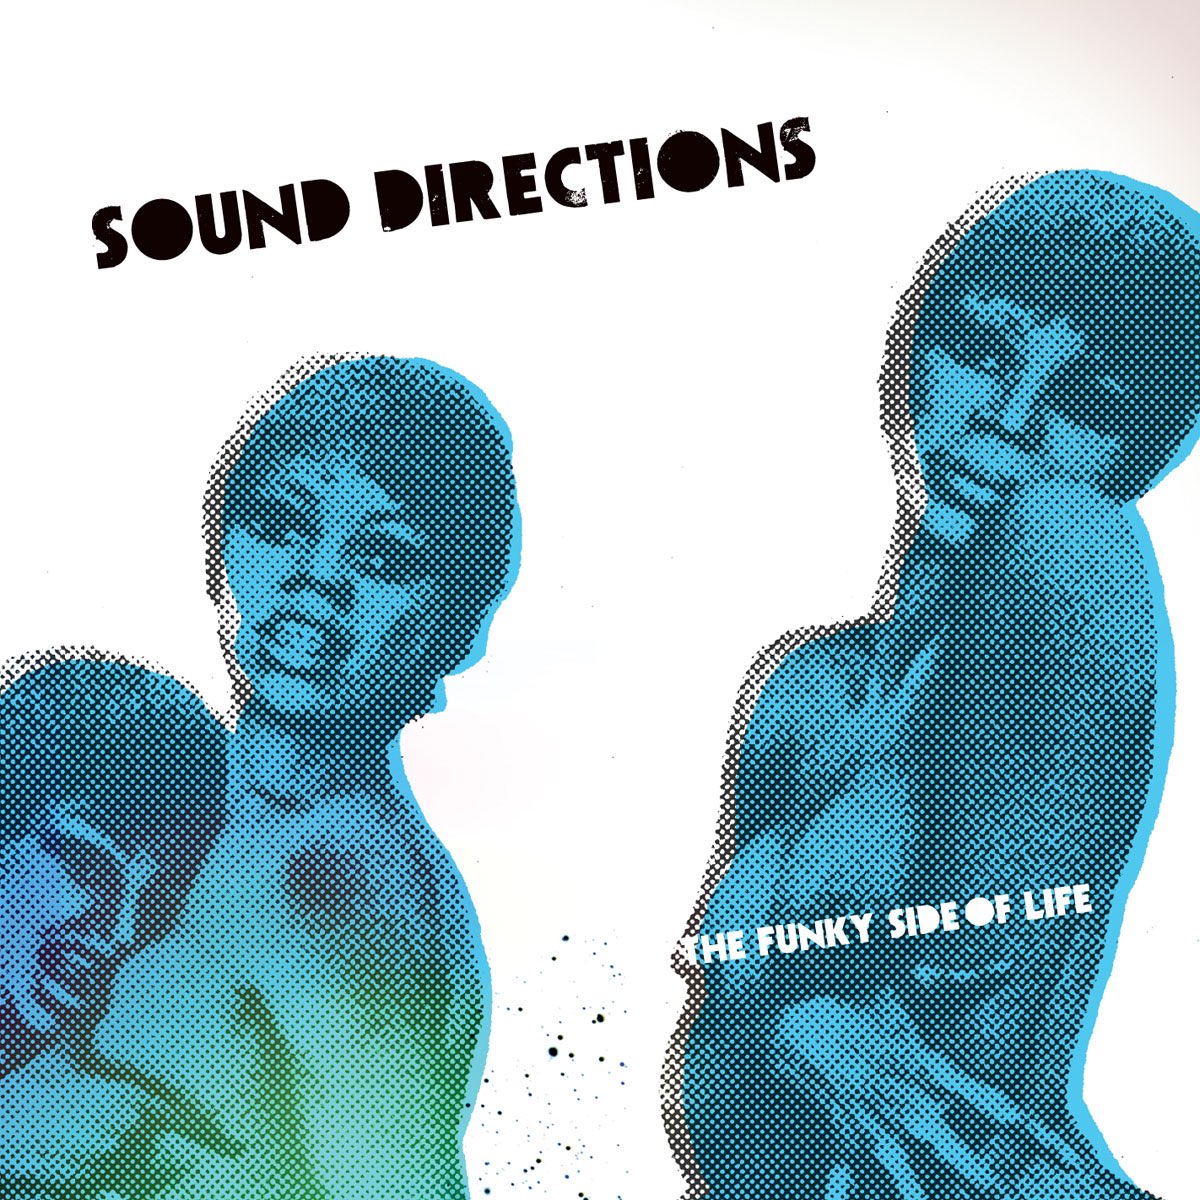 Sound Directions – The Funky Side of Life (2005) [iTunes Match M4A]